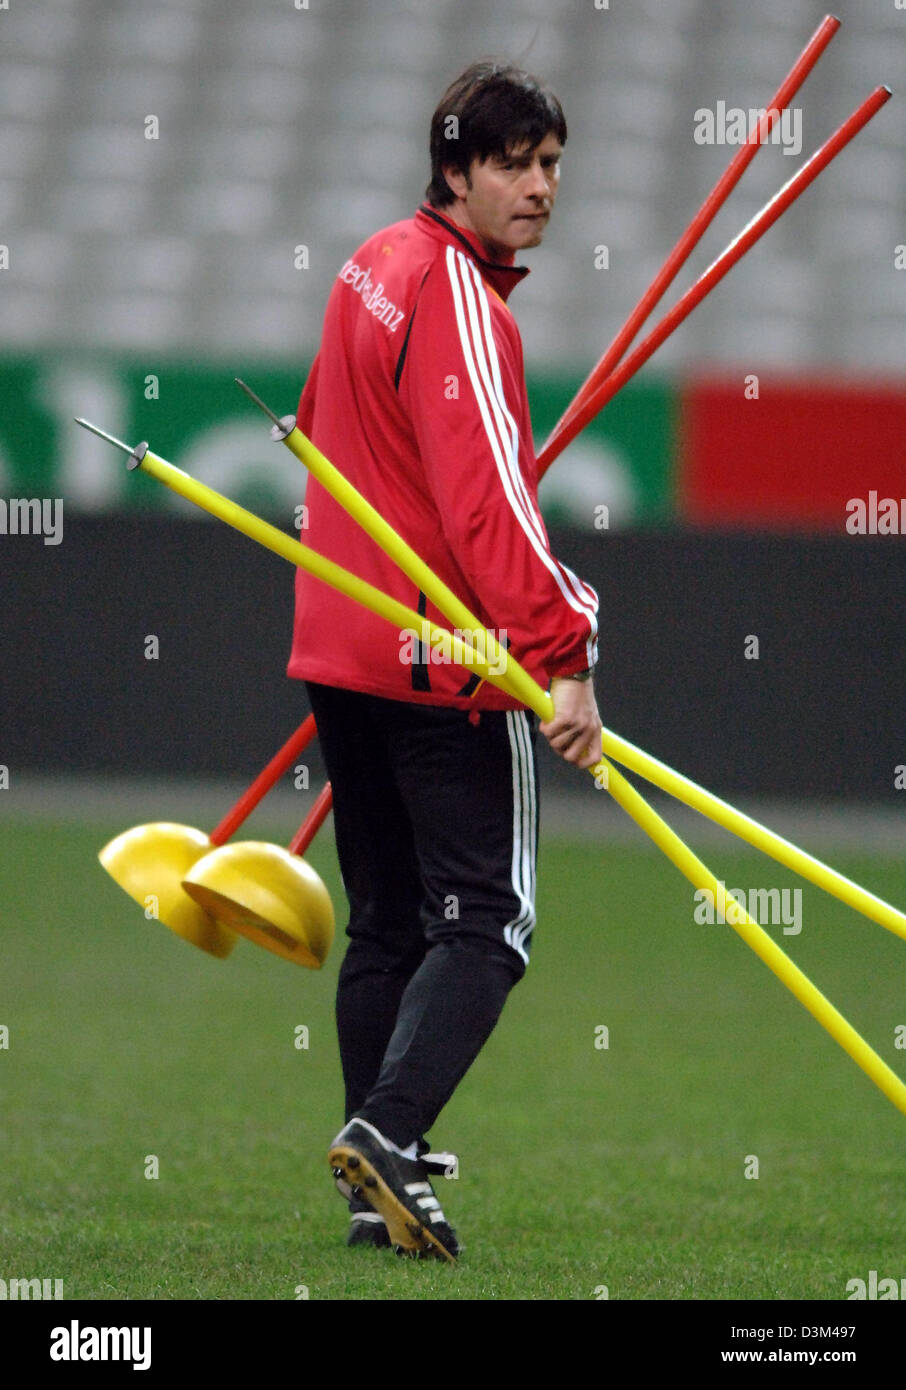 (dpa) - Germany's assistamt coach Joachim Loew distributes red and yellow coloured poles on the pitch during a practice session of the German national soccer squad in Paris, France, Friday, 11 November 2005. Germany prepares for the international friendly against France at the Stade de France in Paris on Saturday, 12 November 2005. Photo Bernd Weissbrod Stock Photo